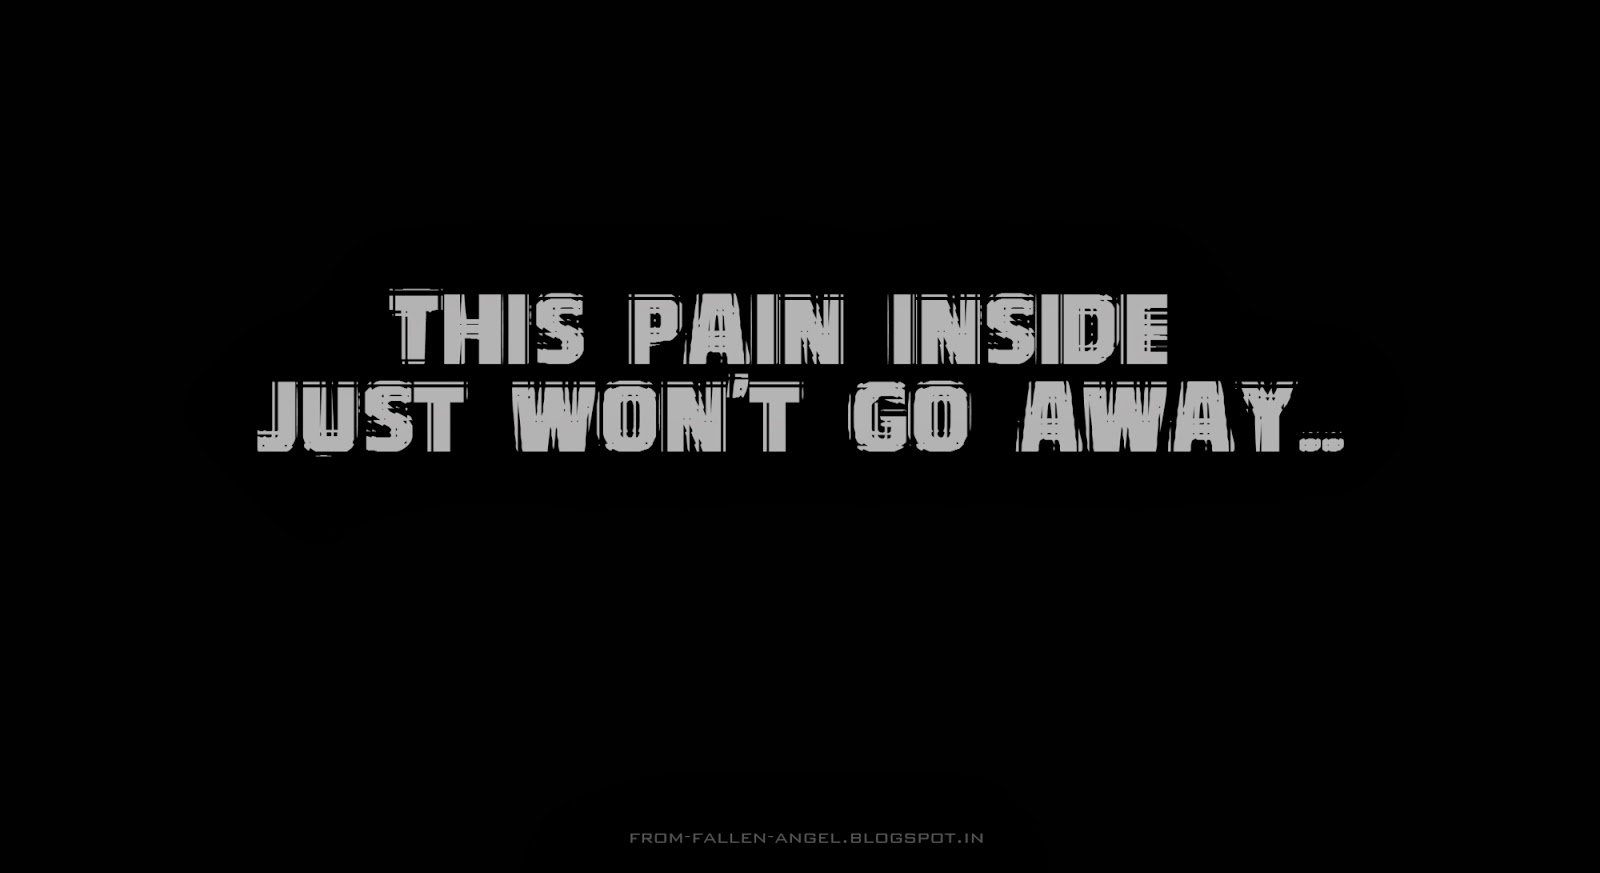 This pain inside just won't go away